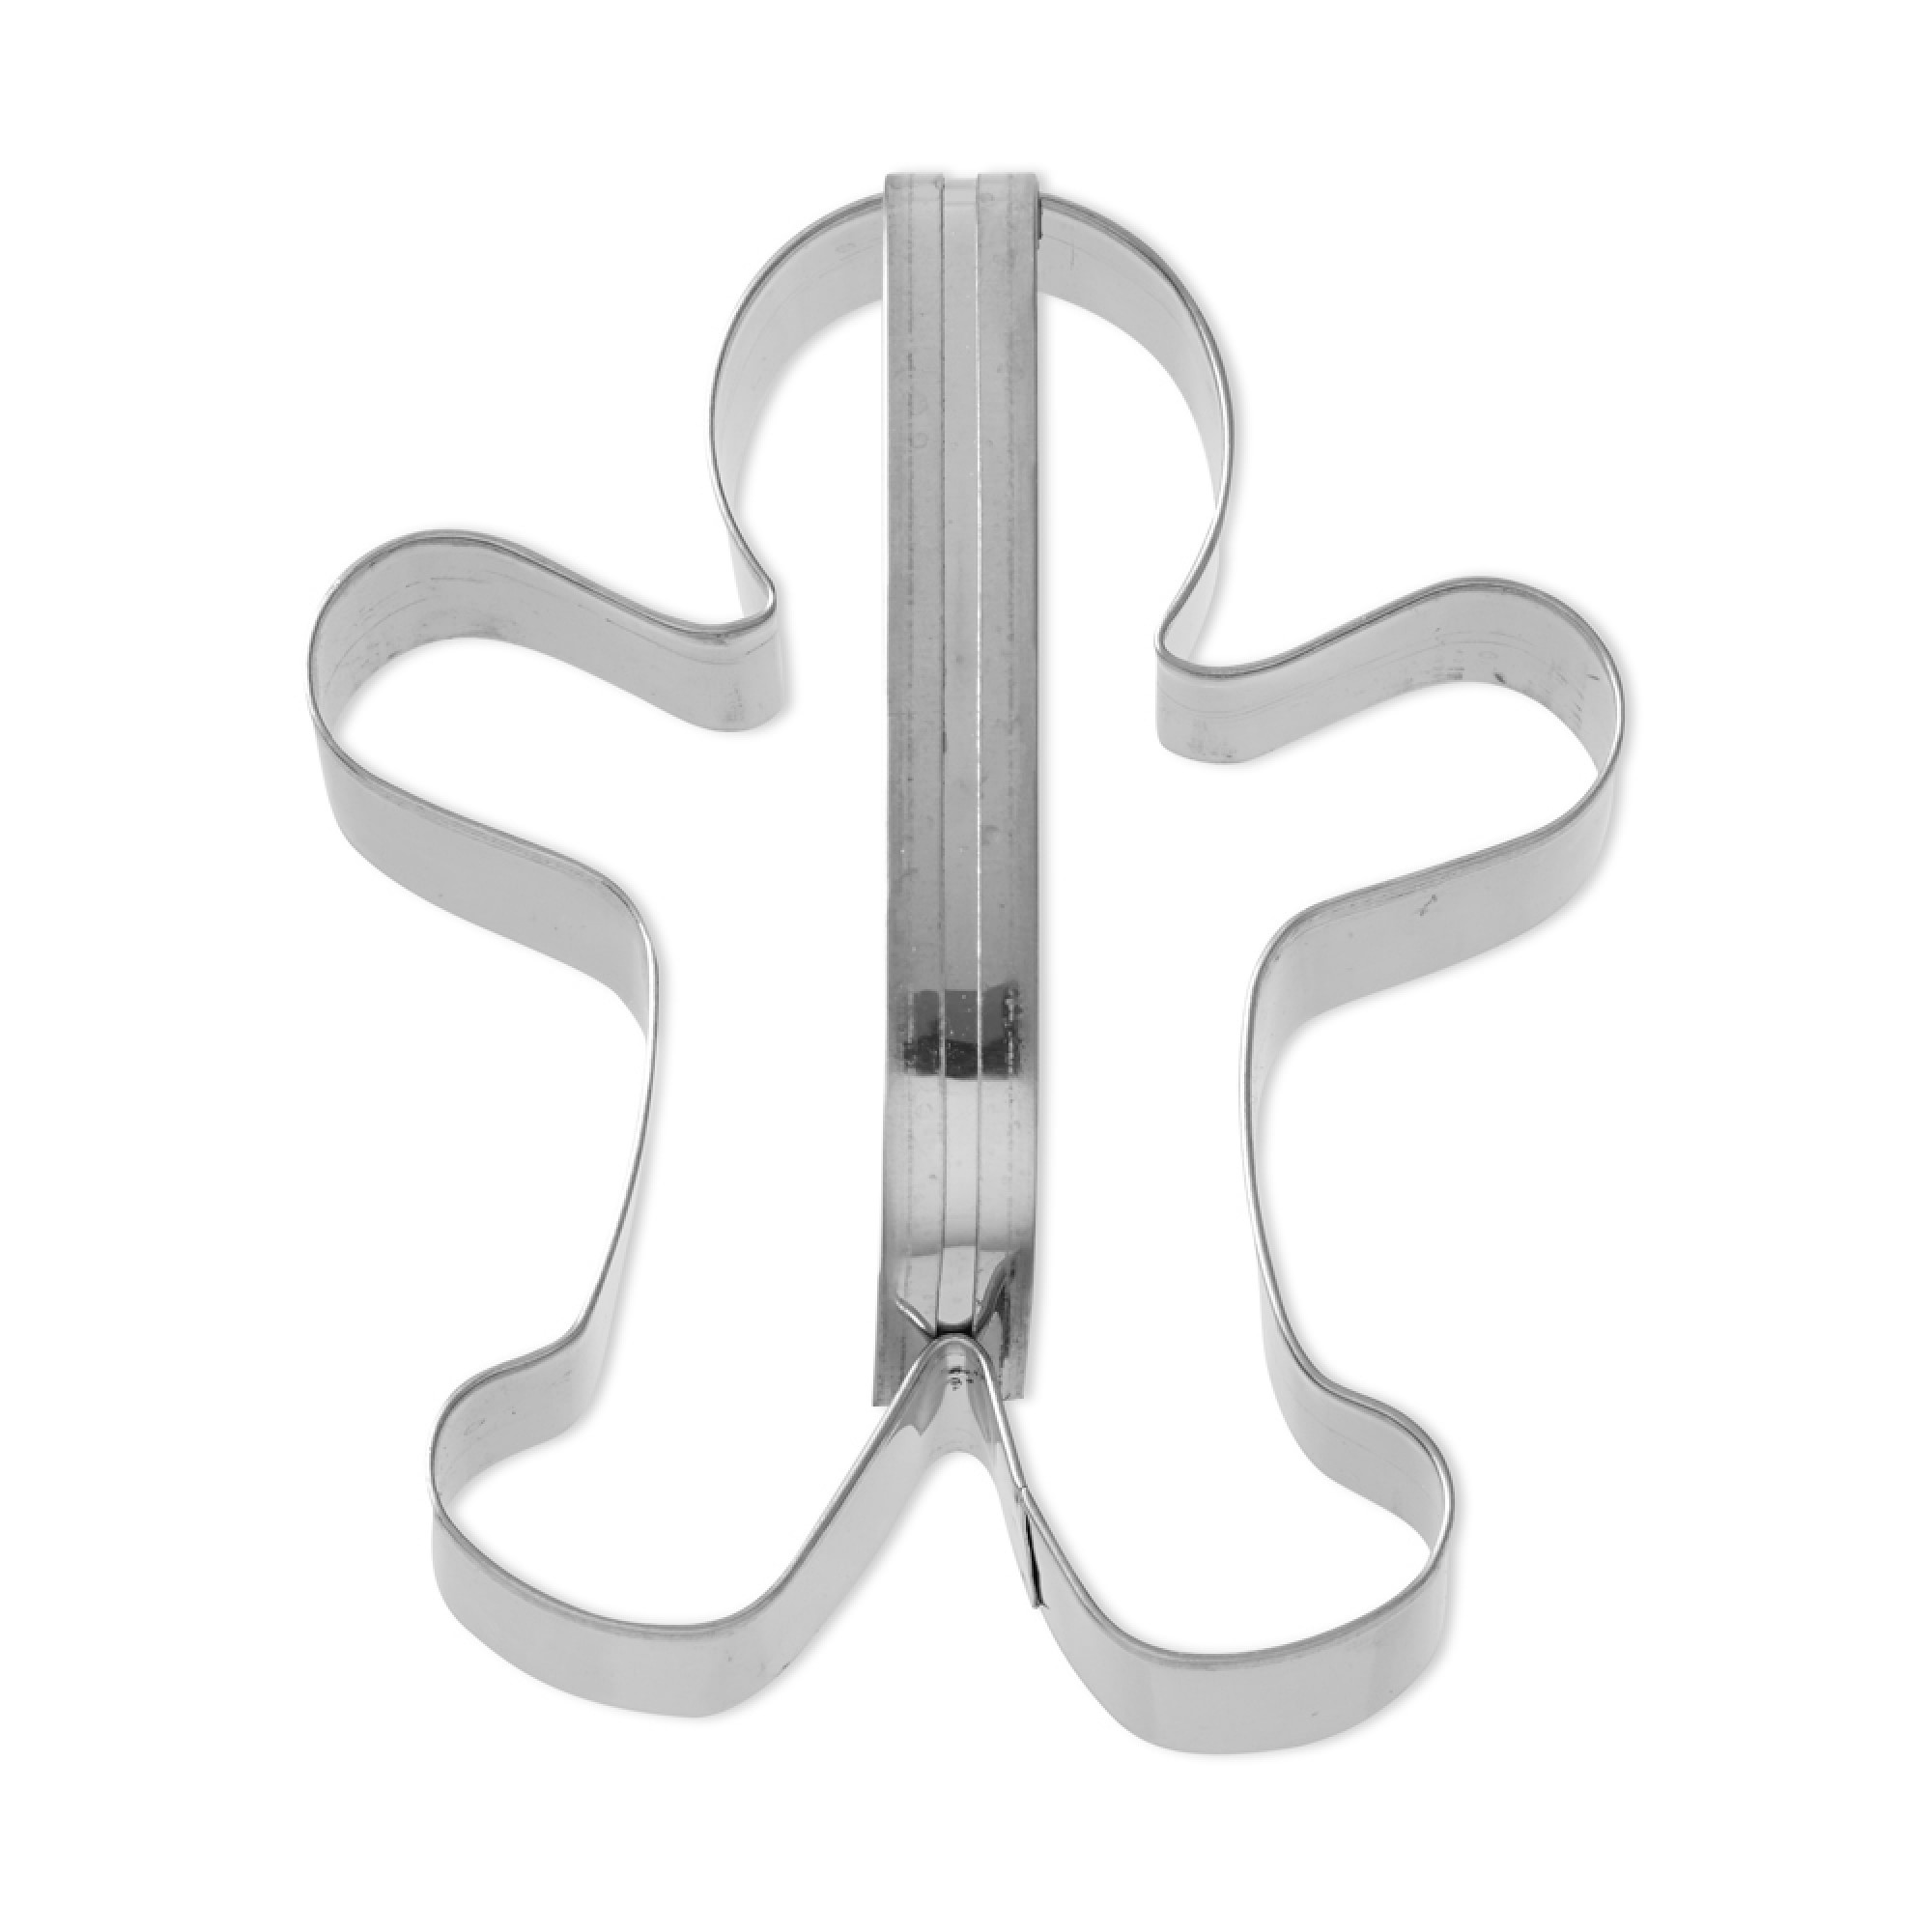 Stainless-Steel Gingerbread Man Handle Cookie Cutter